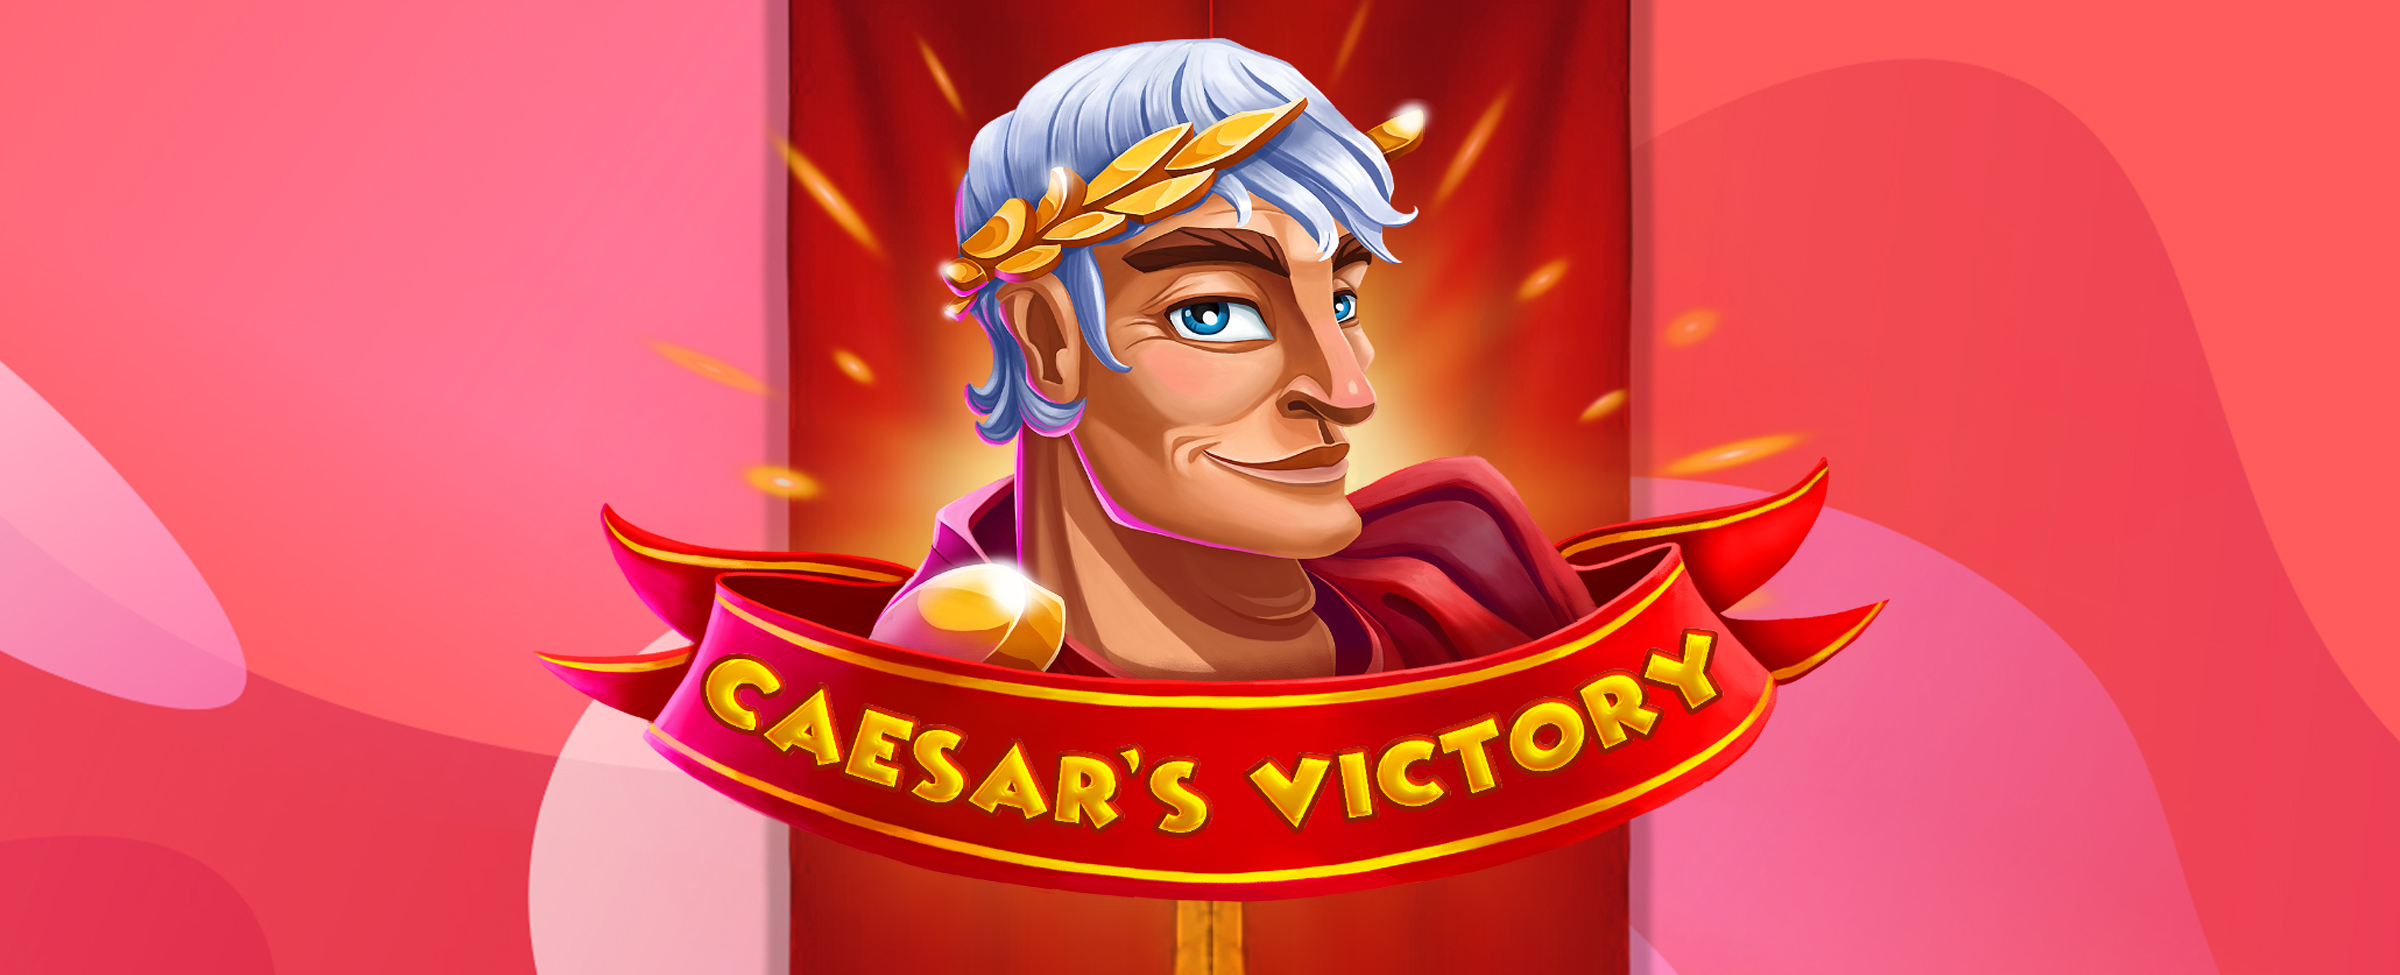 A 3D animated character of Caesar is shown standing in front of a pink wavy background, with the words “Caesar’s Victory” in front, from the SlotsLV slot game of the same name.